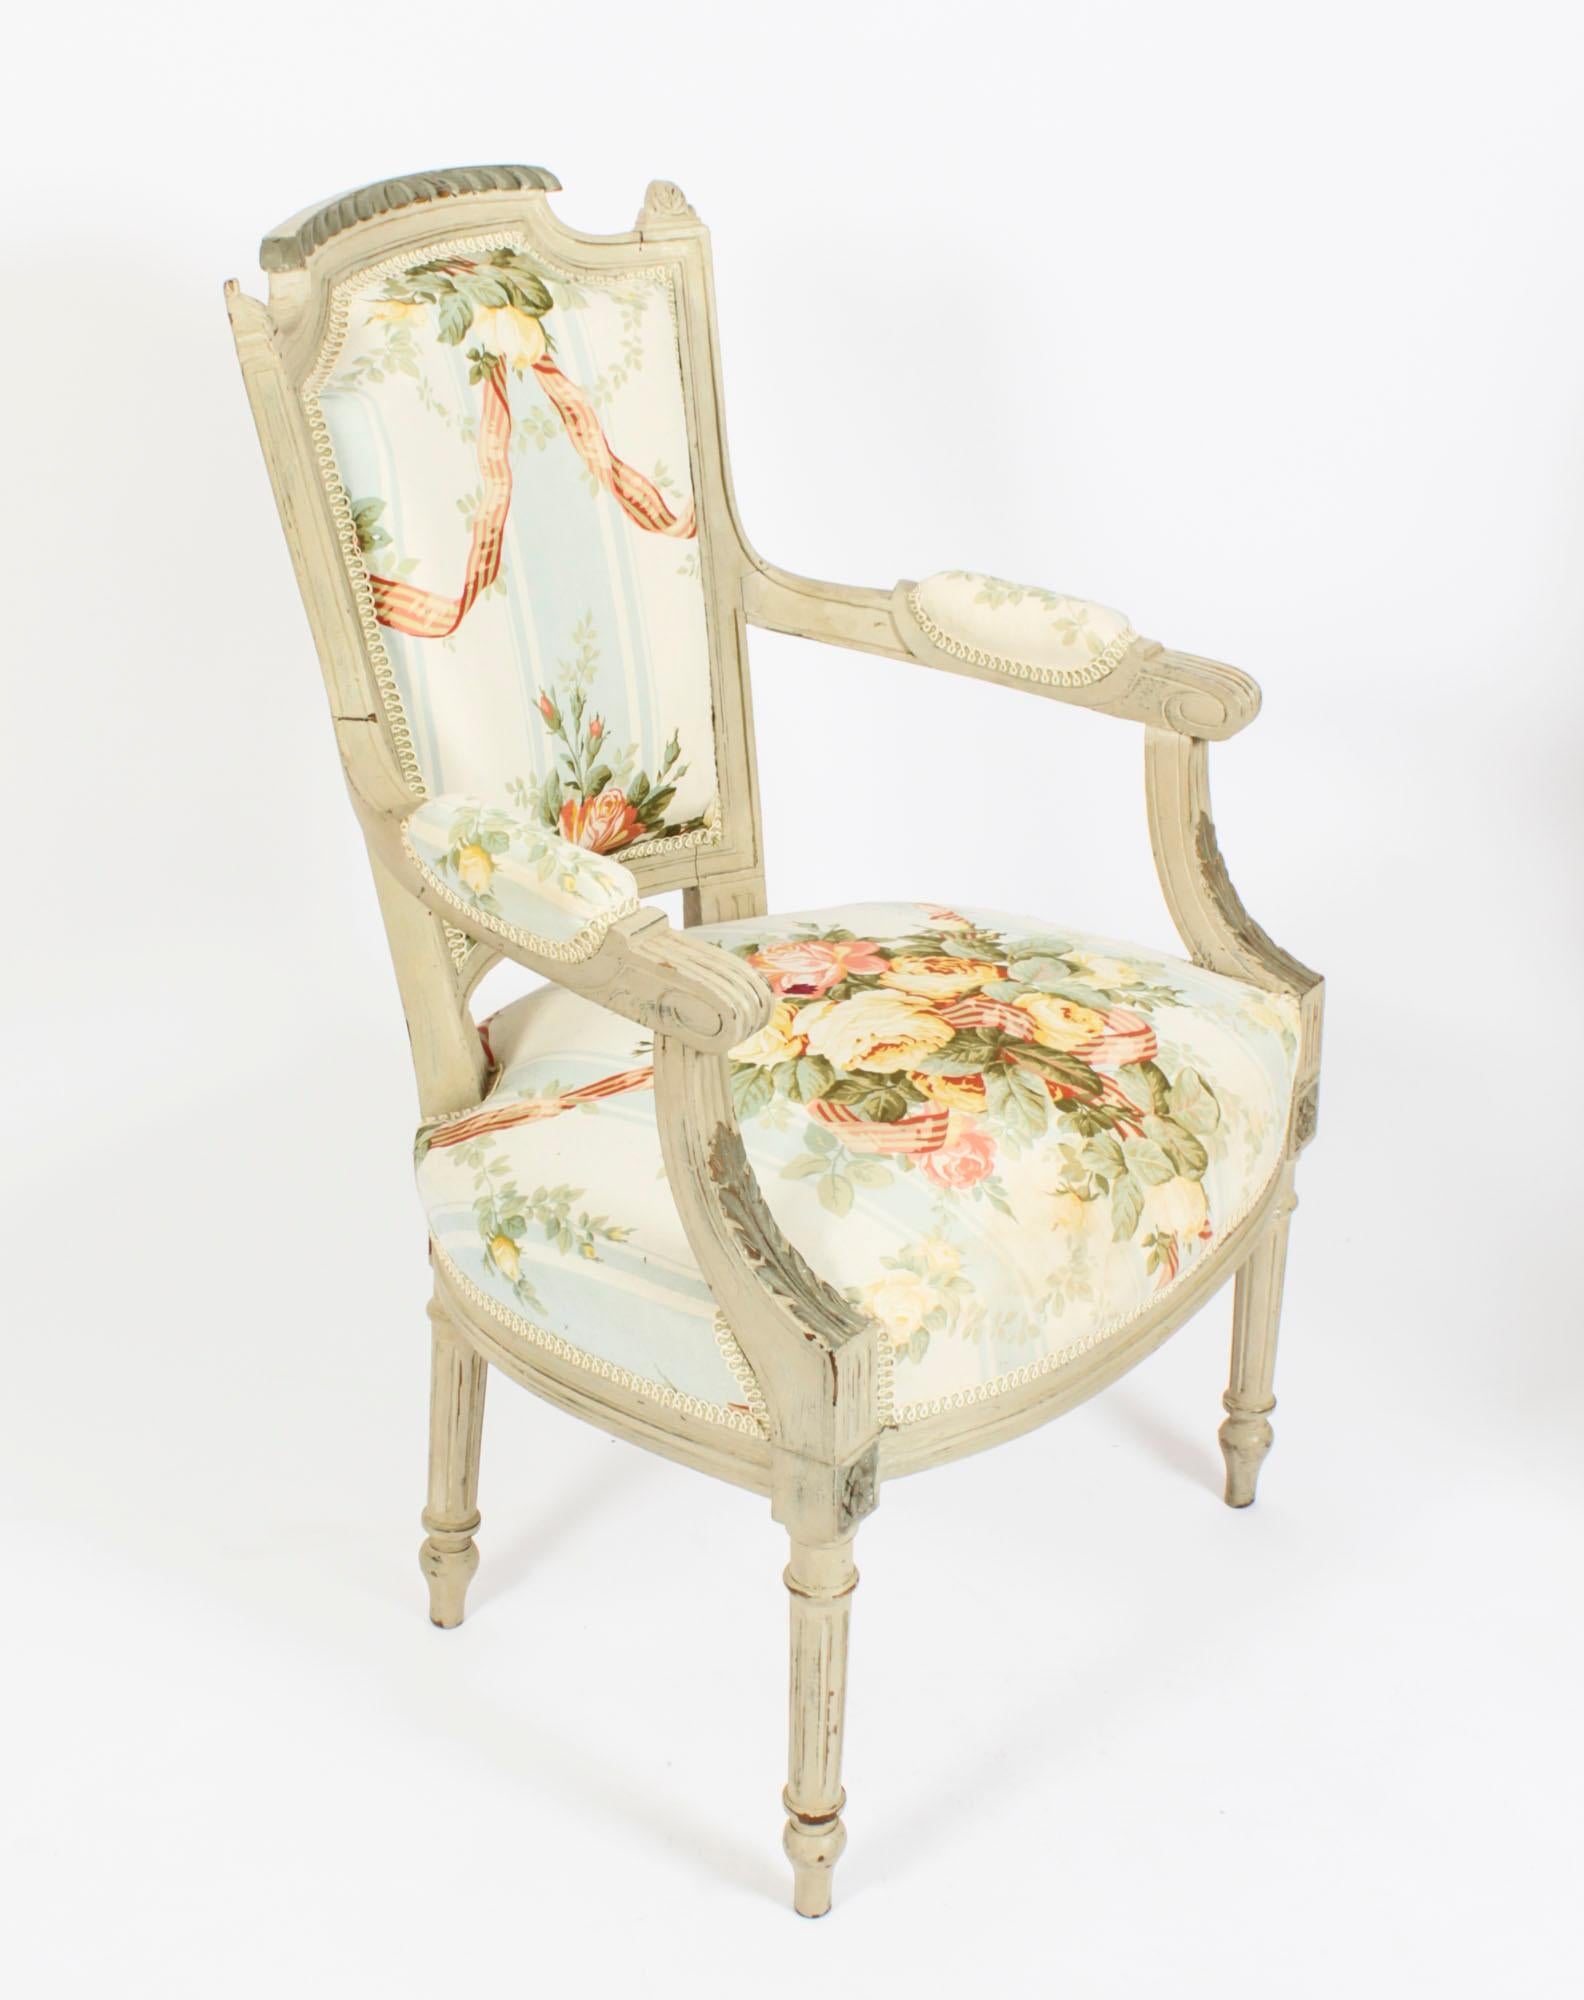 This is a elegant Antique pair of Louis XVI Revival painted fauteuil armchairs, circa 1880 in date.
Constructed in a well carved two tone grey beechwood, with later floral and swag design upholstery; rising from turned and tapering legs with toupie